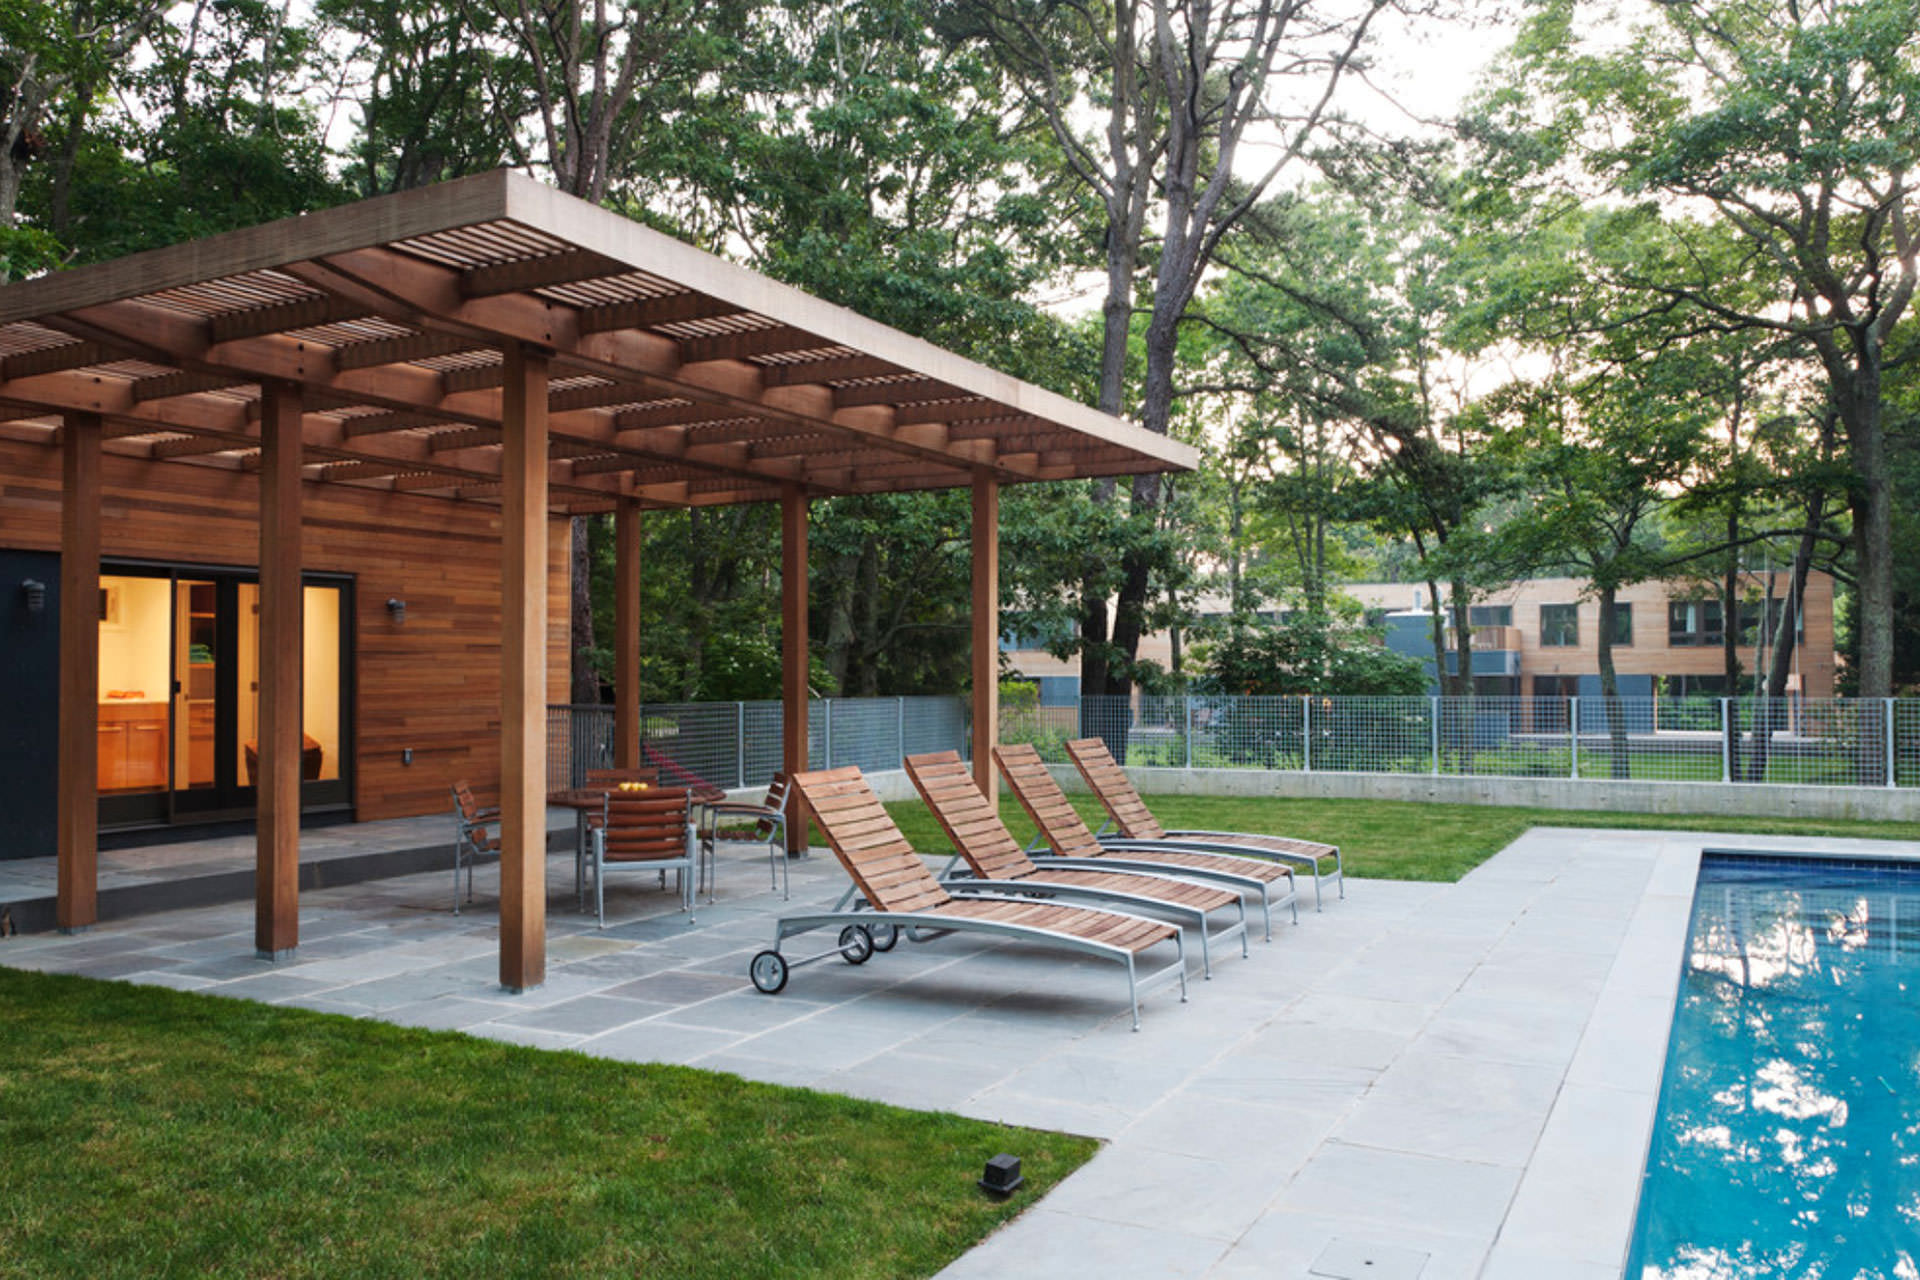 Keep Cool with These Five Patio Shade Ideas | ShadeFX Canopies